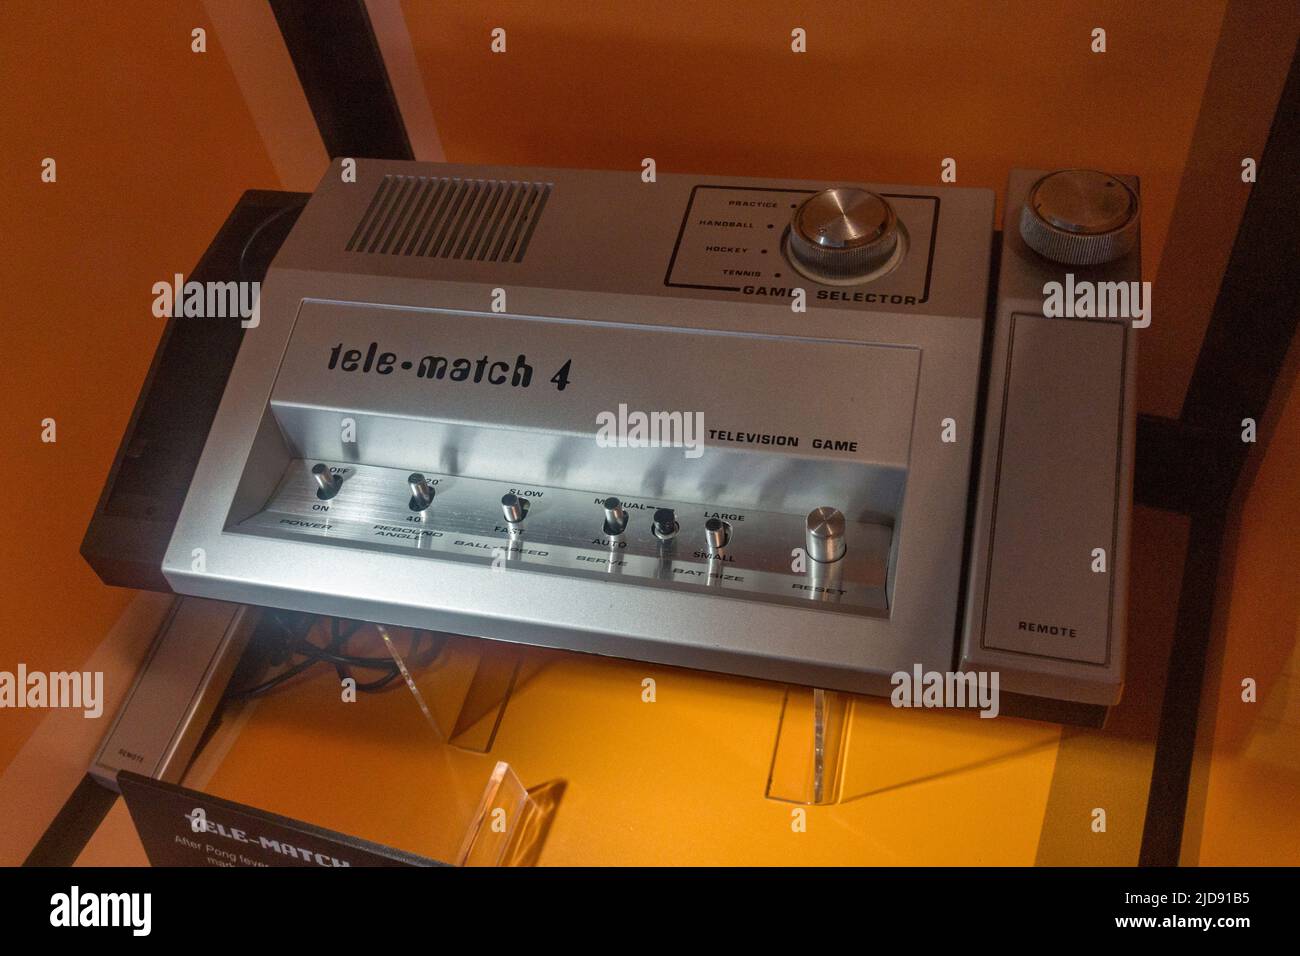 A Tele-match 4 model 6600 (1976) television computer game system on display in a media museum. (also known as the Atomic Tv Player 1. Stock Photo